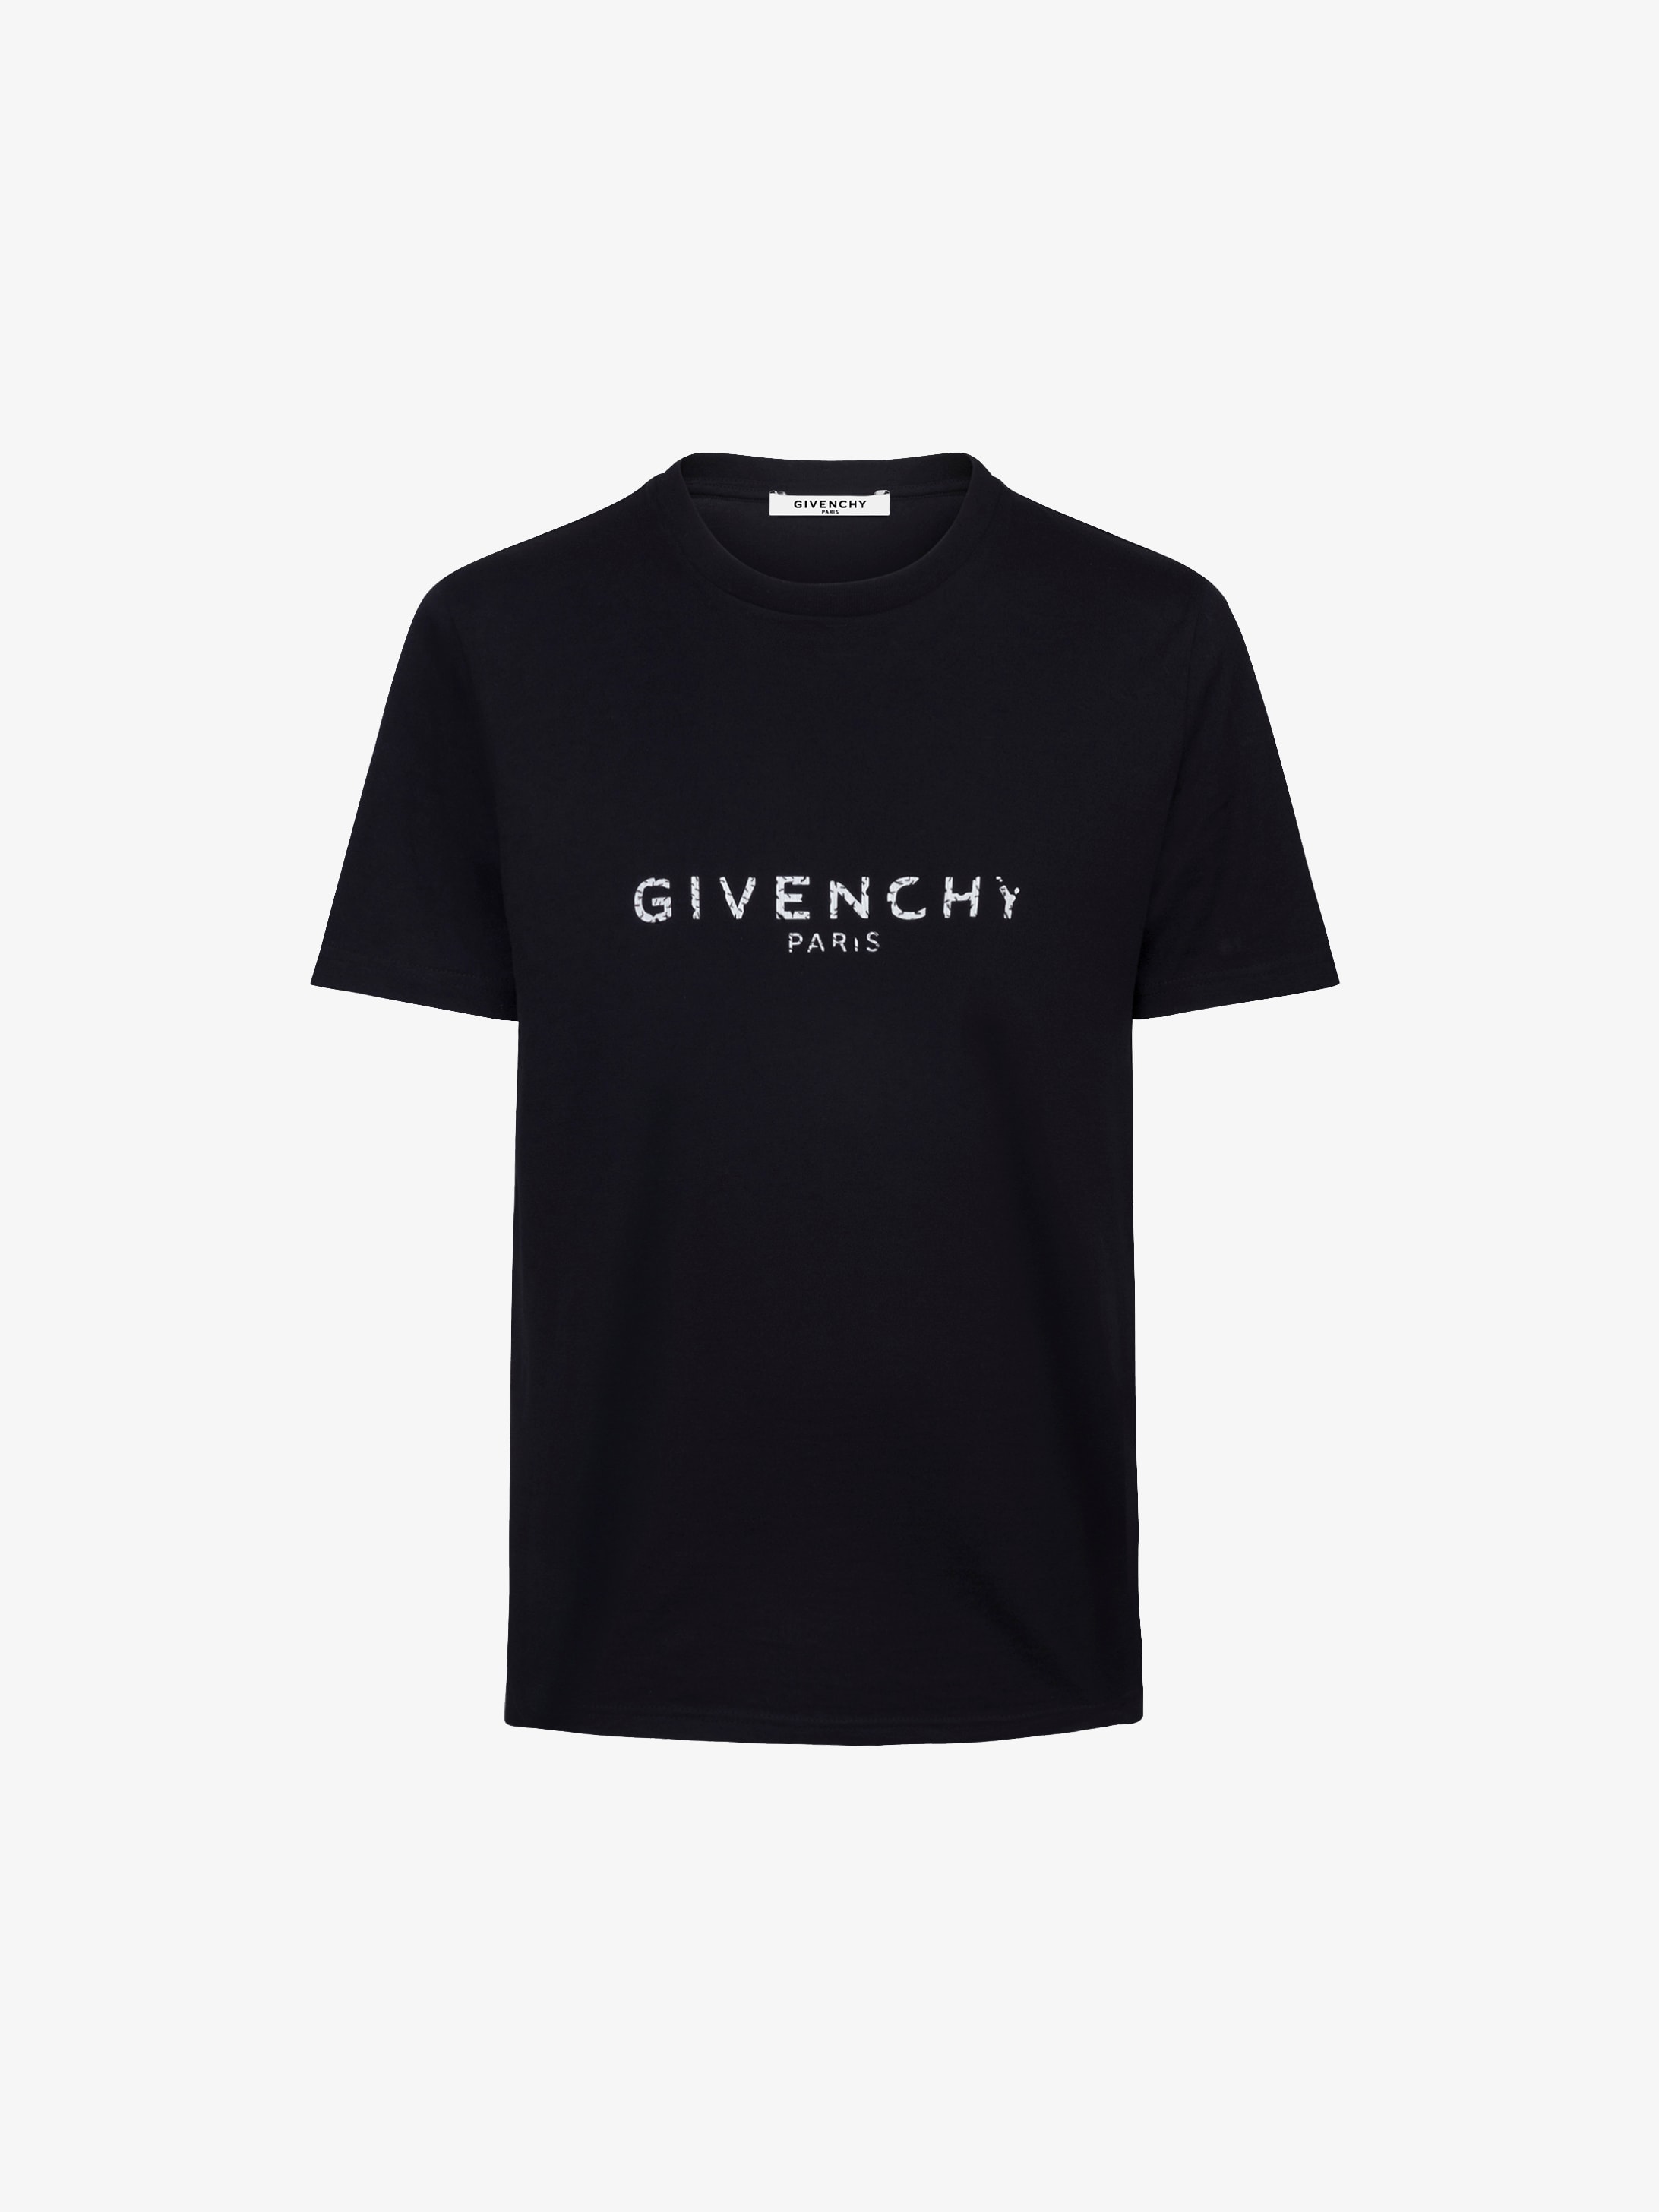 givenchy slim fit t shirt